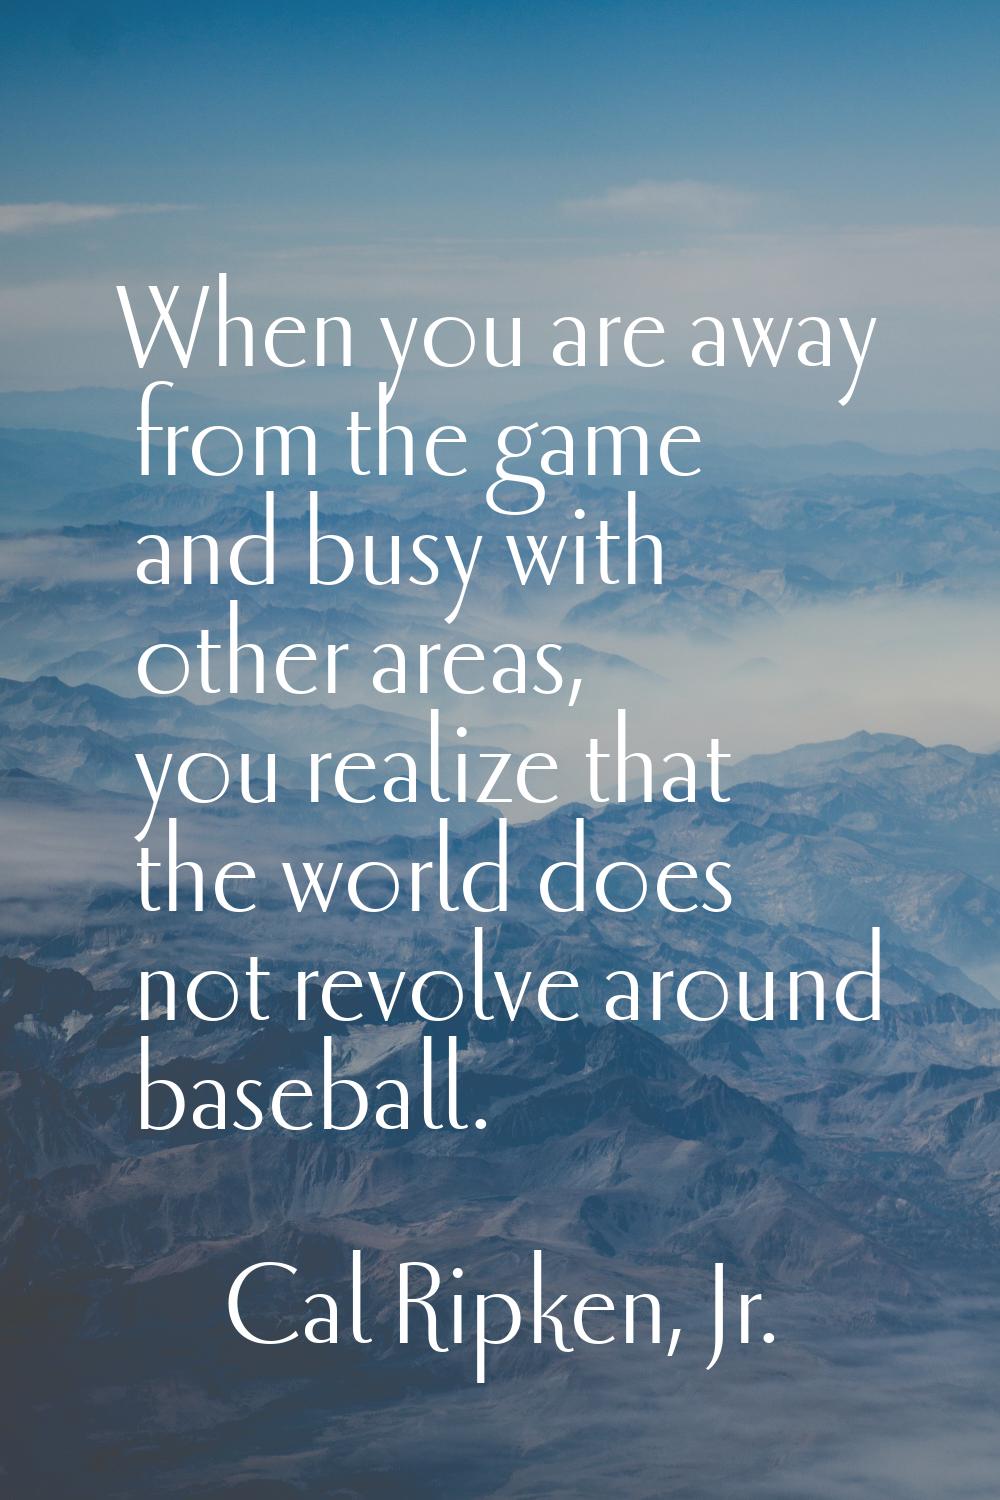 When you are away from the game and busy with other areas, you realize that the world does not revo